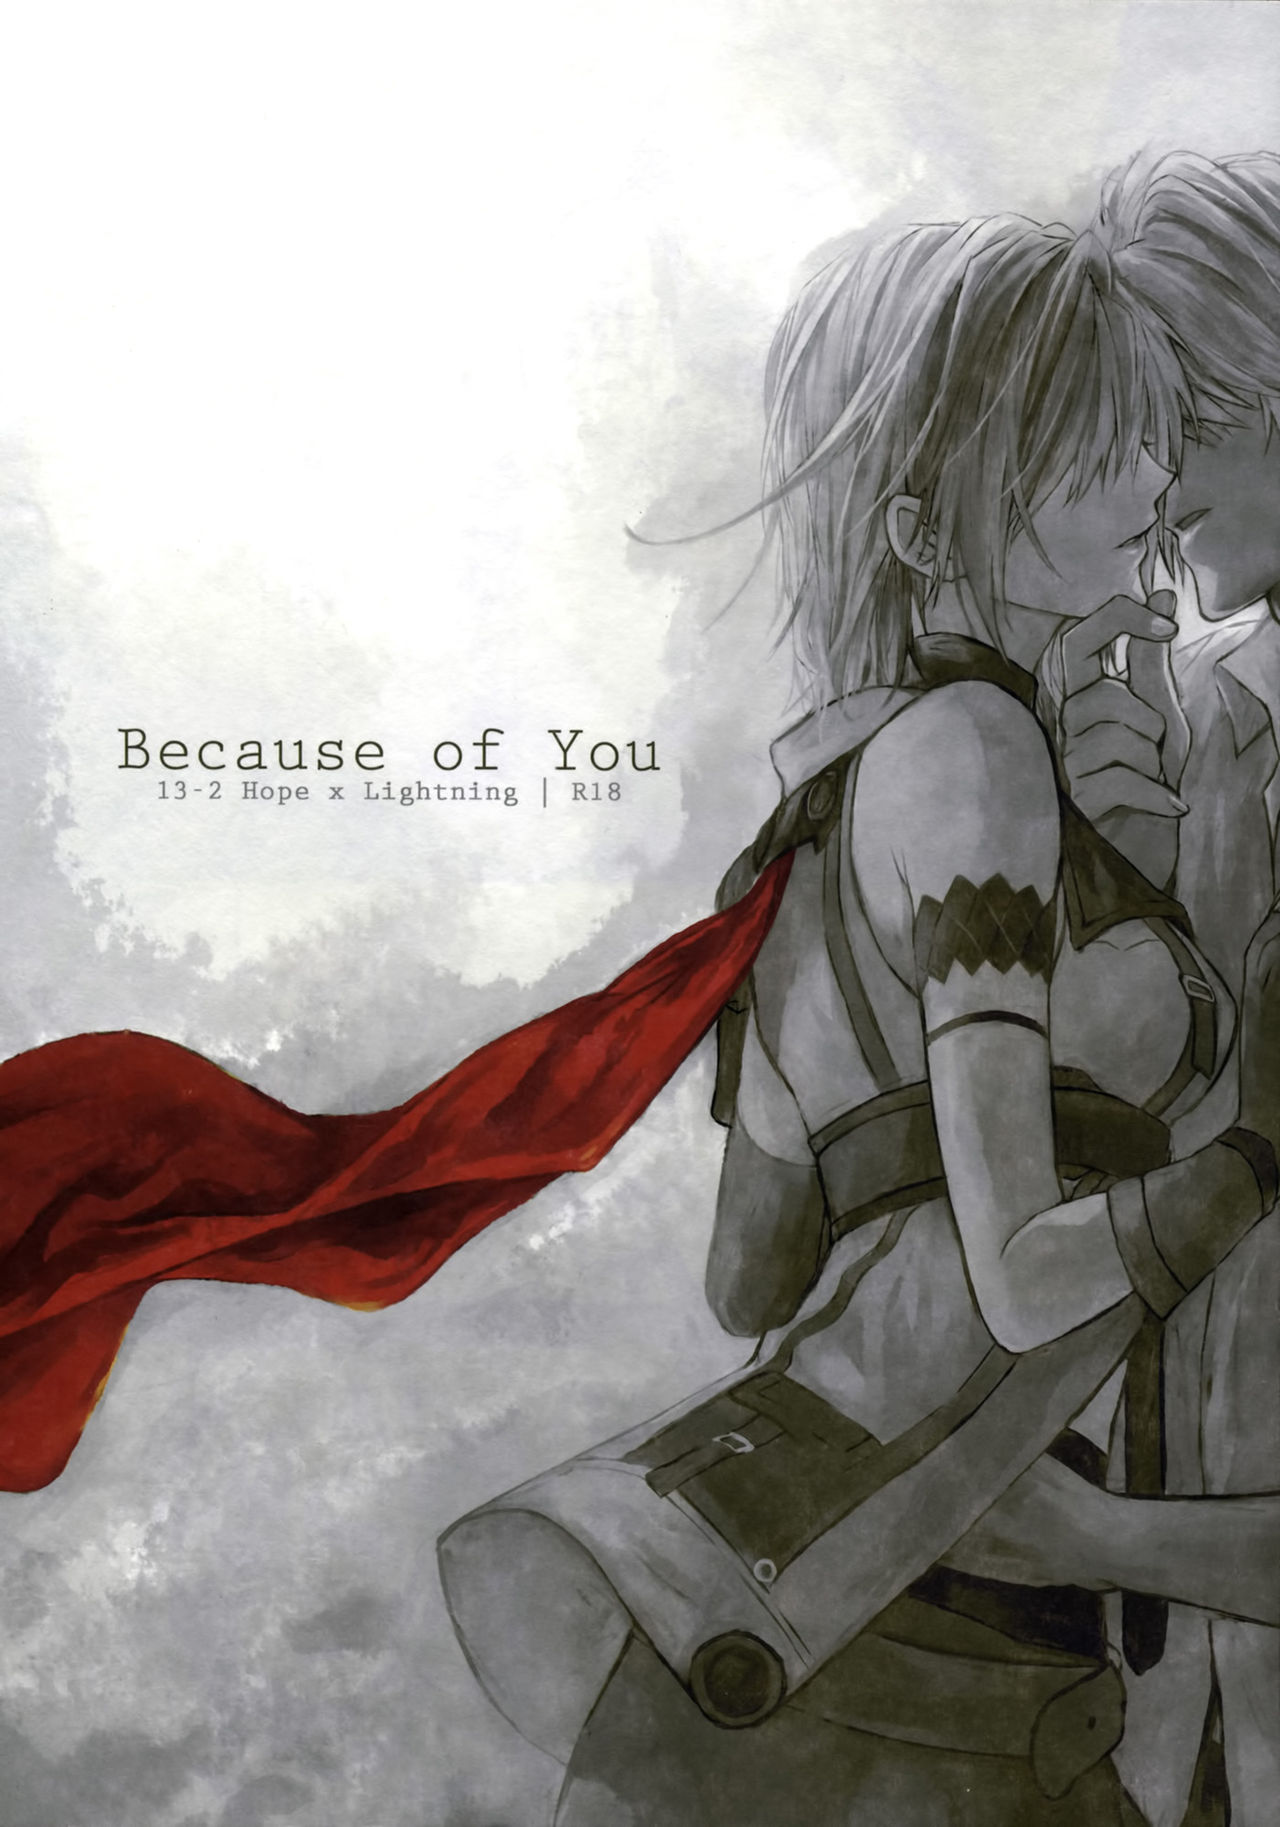 (SPARK7) [CassiS (RIOKO)] Because of You (Final Fantasy XIII-2) [Chinese] [临时义军x无毒汉化组] (SPARK7) [CassiS (りおこ)] Because of You (ファイナルファンタジー XIII-2) [中文翻譯]